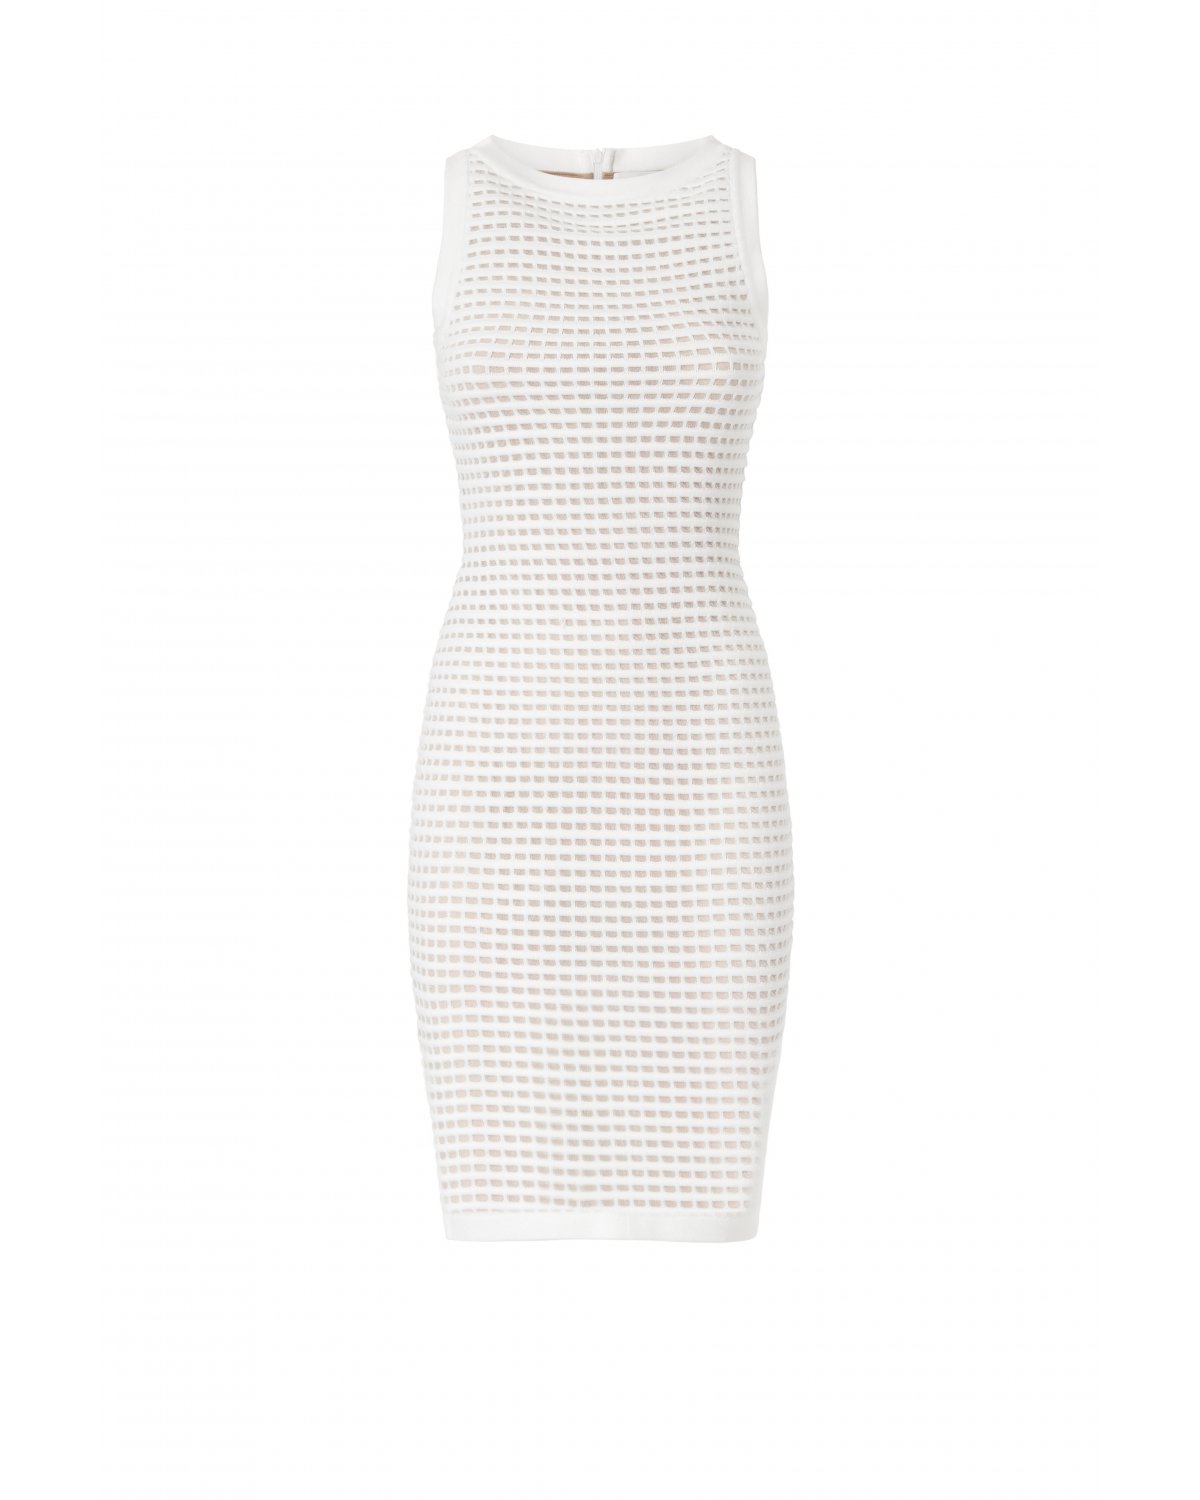 White jacquard iconic dress | Iconic Capsule Collection, 73_74 | Genny